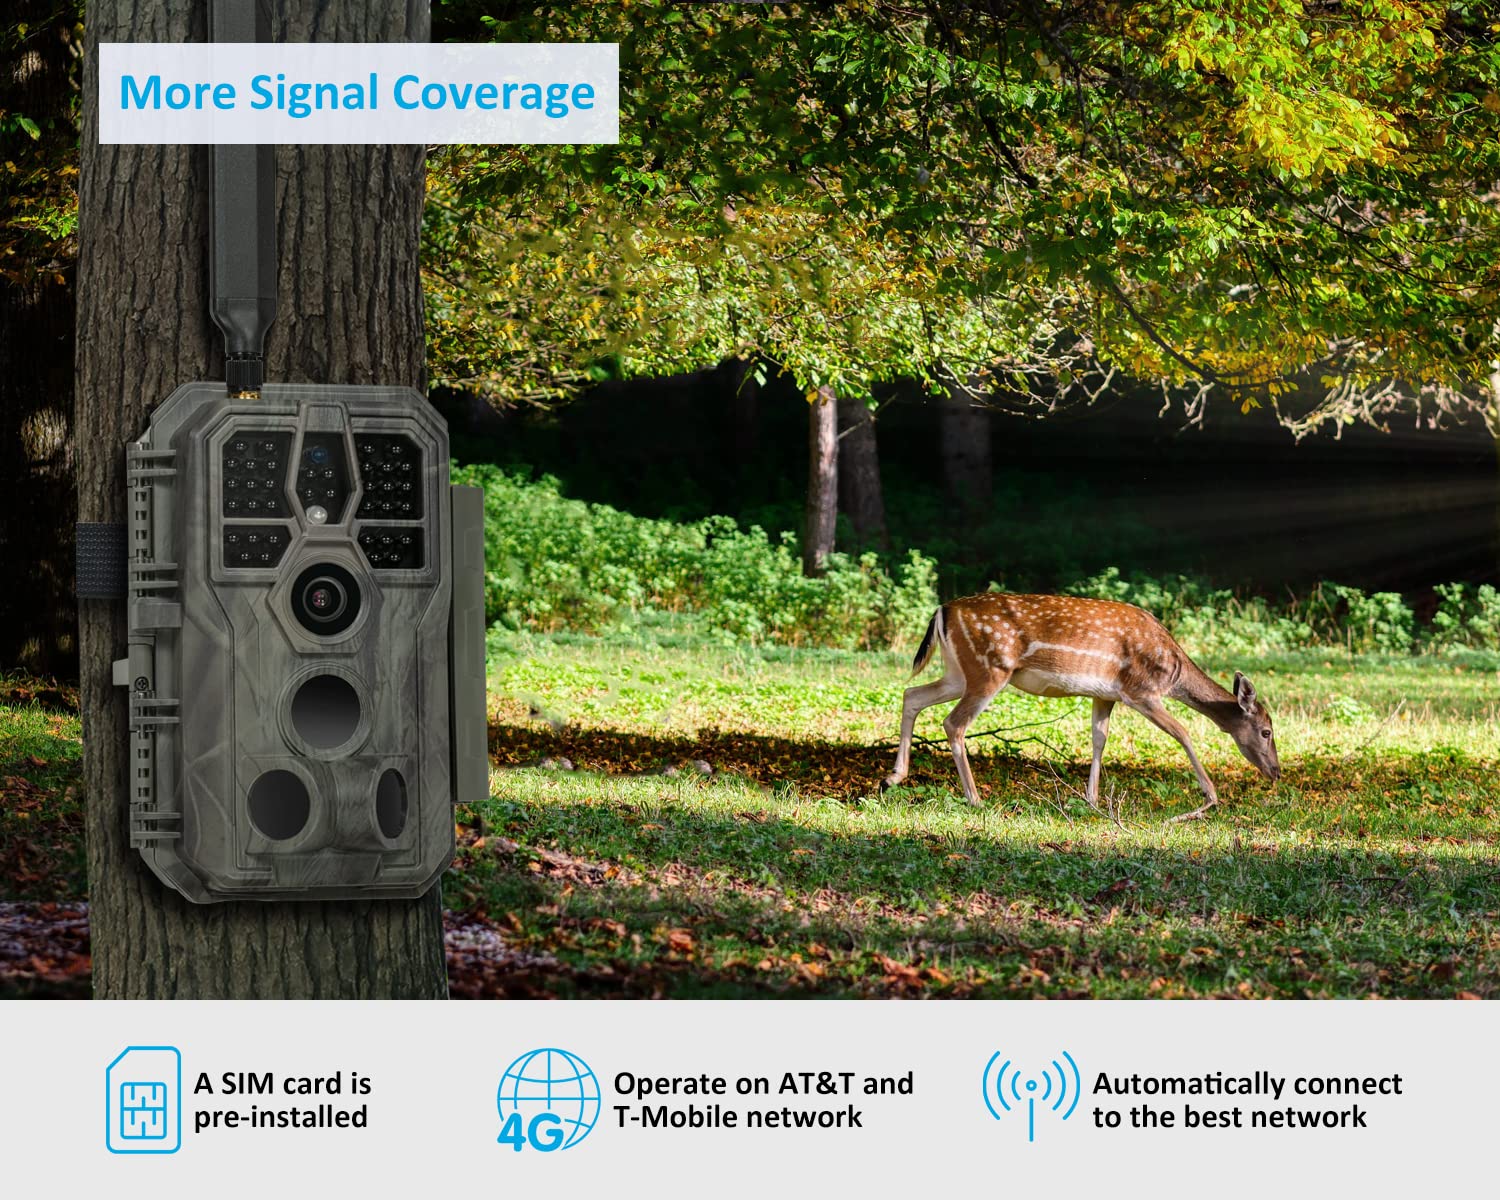 GardePro X50 Celluar Trail Camera, 3G/4G LTE Game Cameras with 32MP 1080p, Innovative Lite Video, 0.1s Trigger Speed, 100ft Night Vision, Send Pictures to Cell Phone